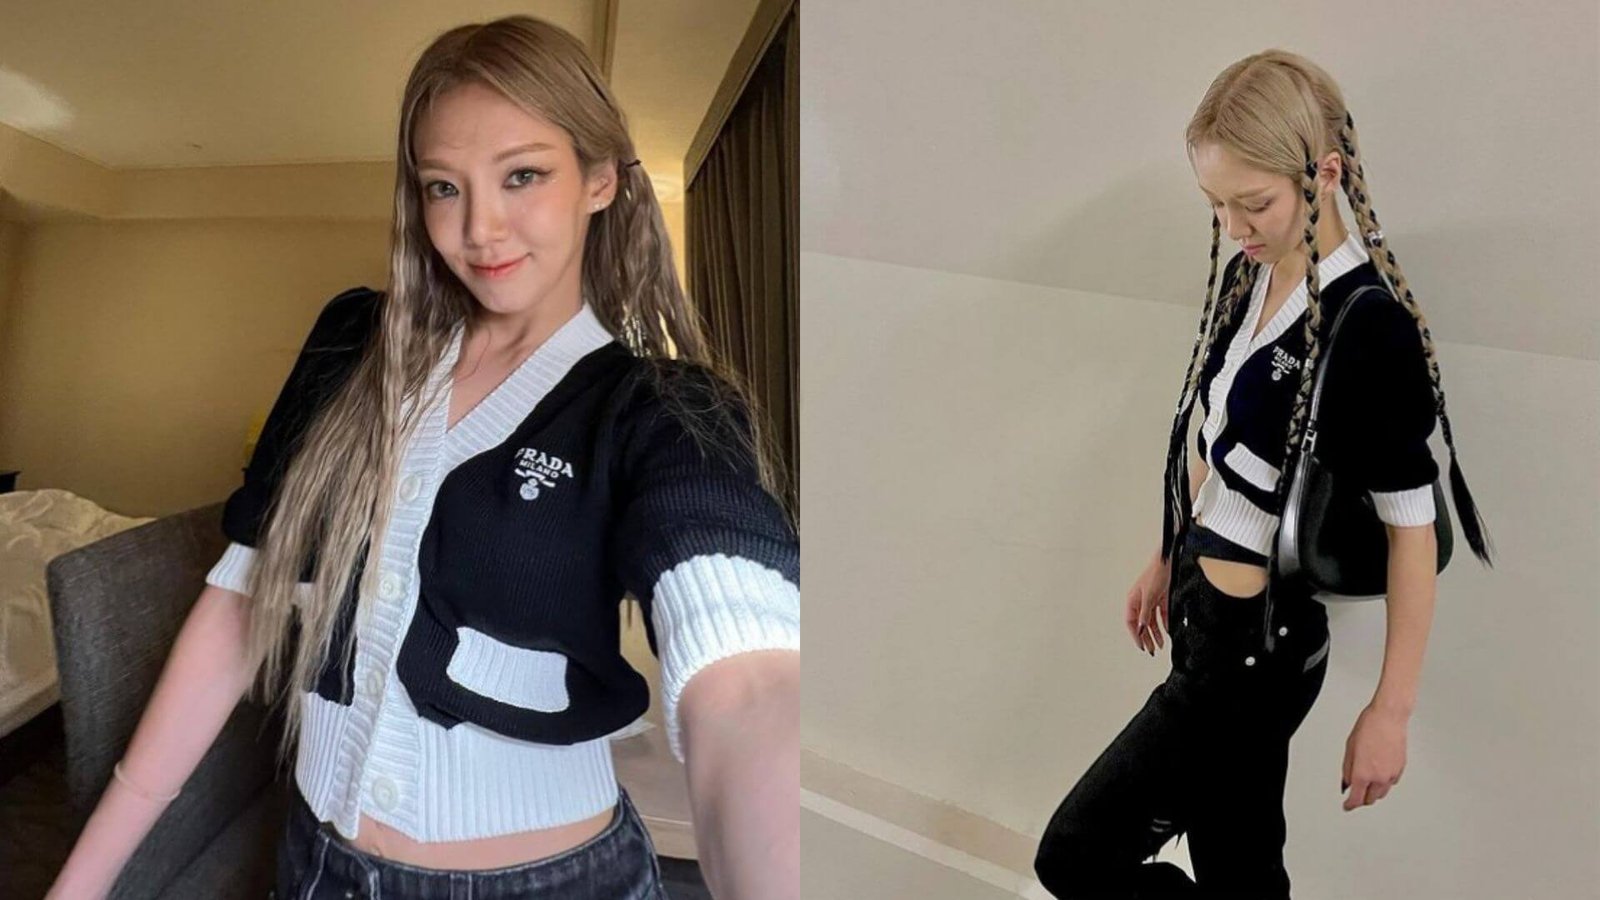 snsd-hyoyeon-in-a-prada-cardigan-after-losing-9kg-kpop-news-delivered-korea